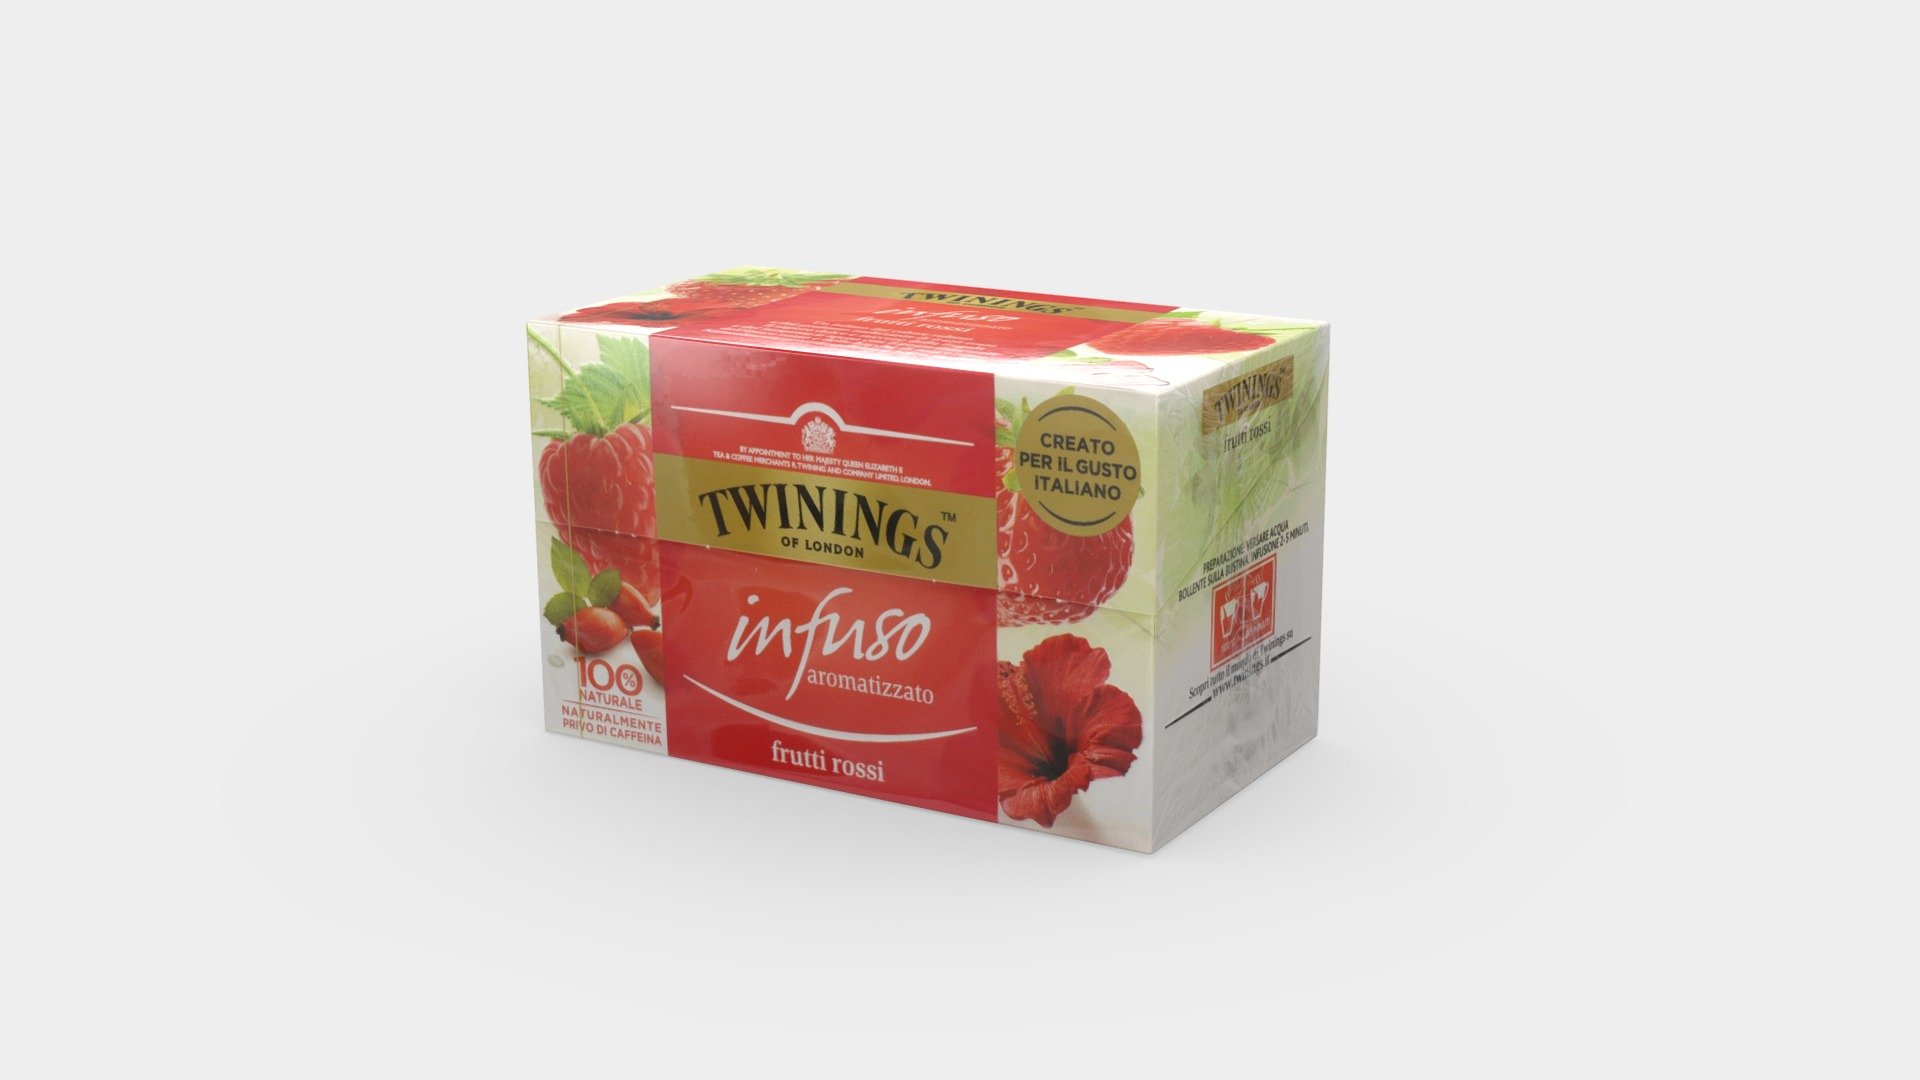 Twinings Infuso Frutti Rossi model
VR and game ready for high quality Retail Simulations
0070177177539 - Twinings Infuso Frutti Rossi - 3D model by Invrsion 3d model